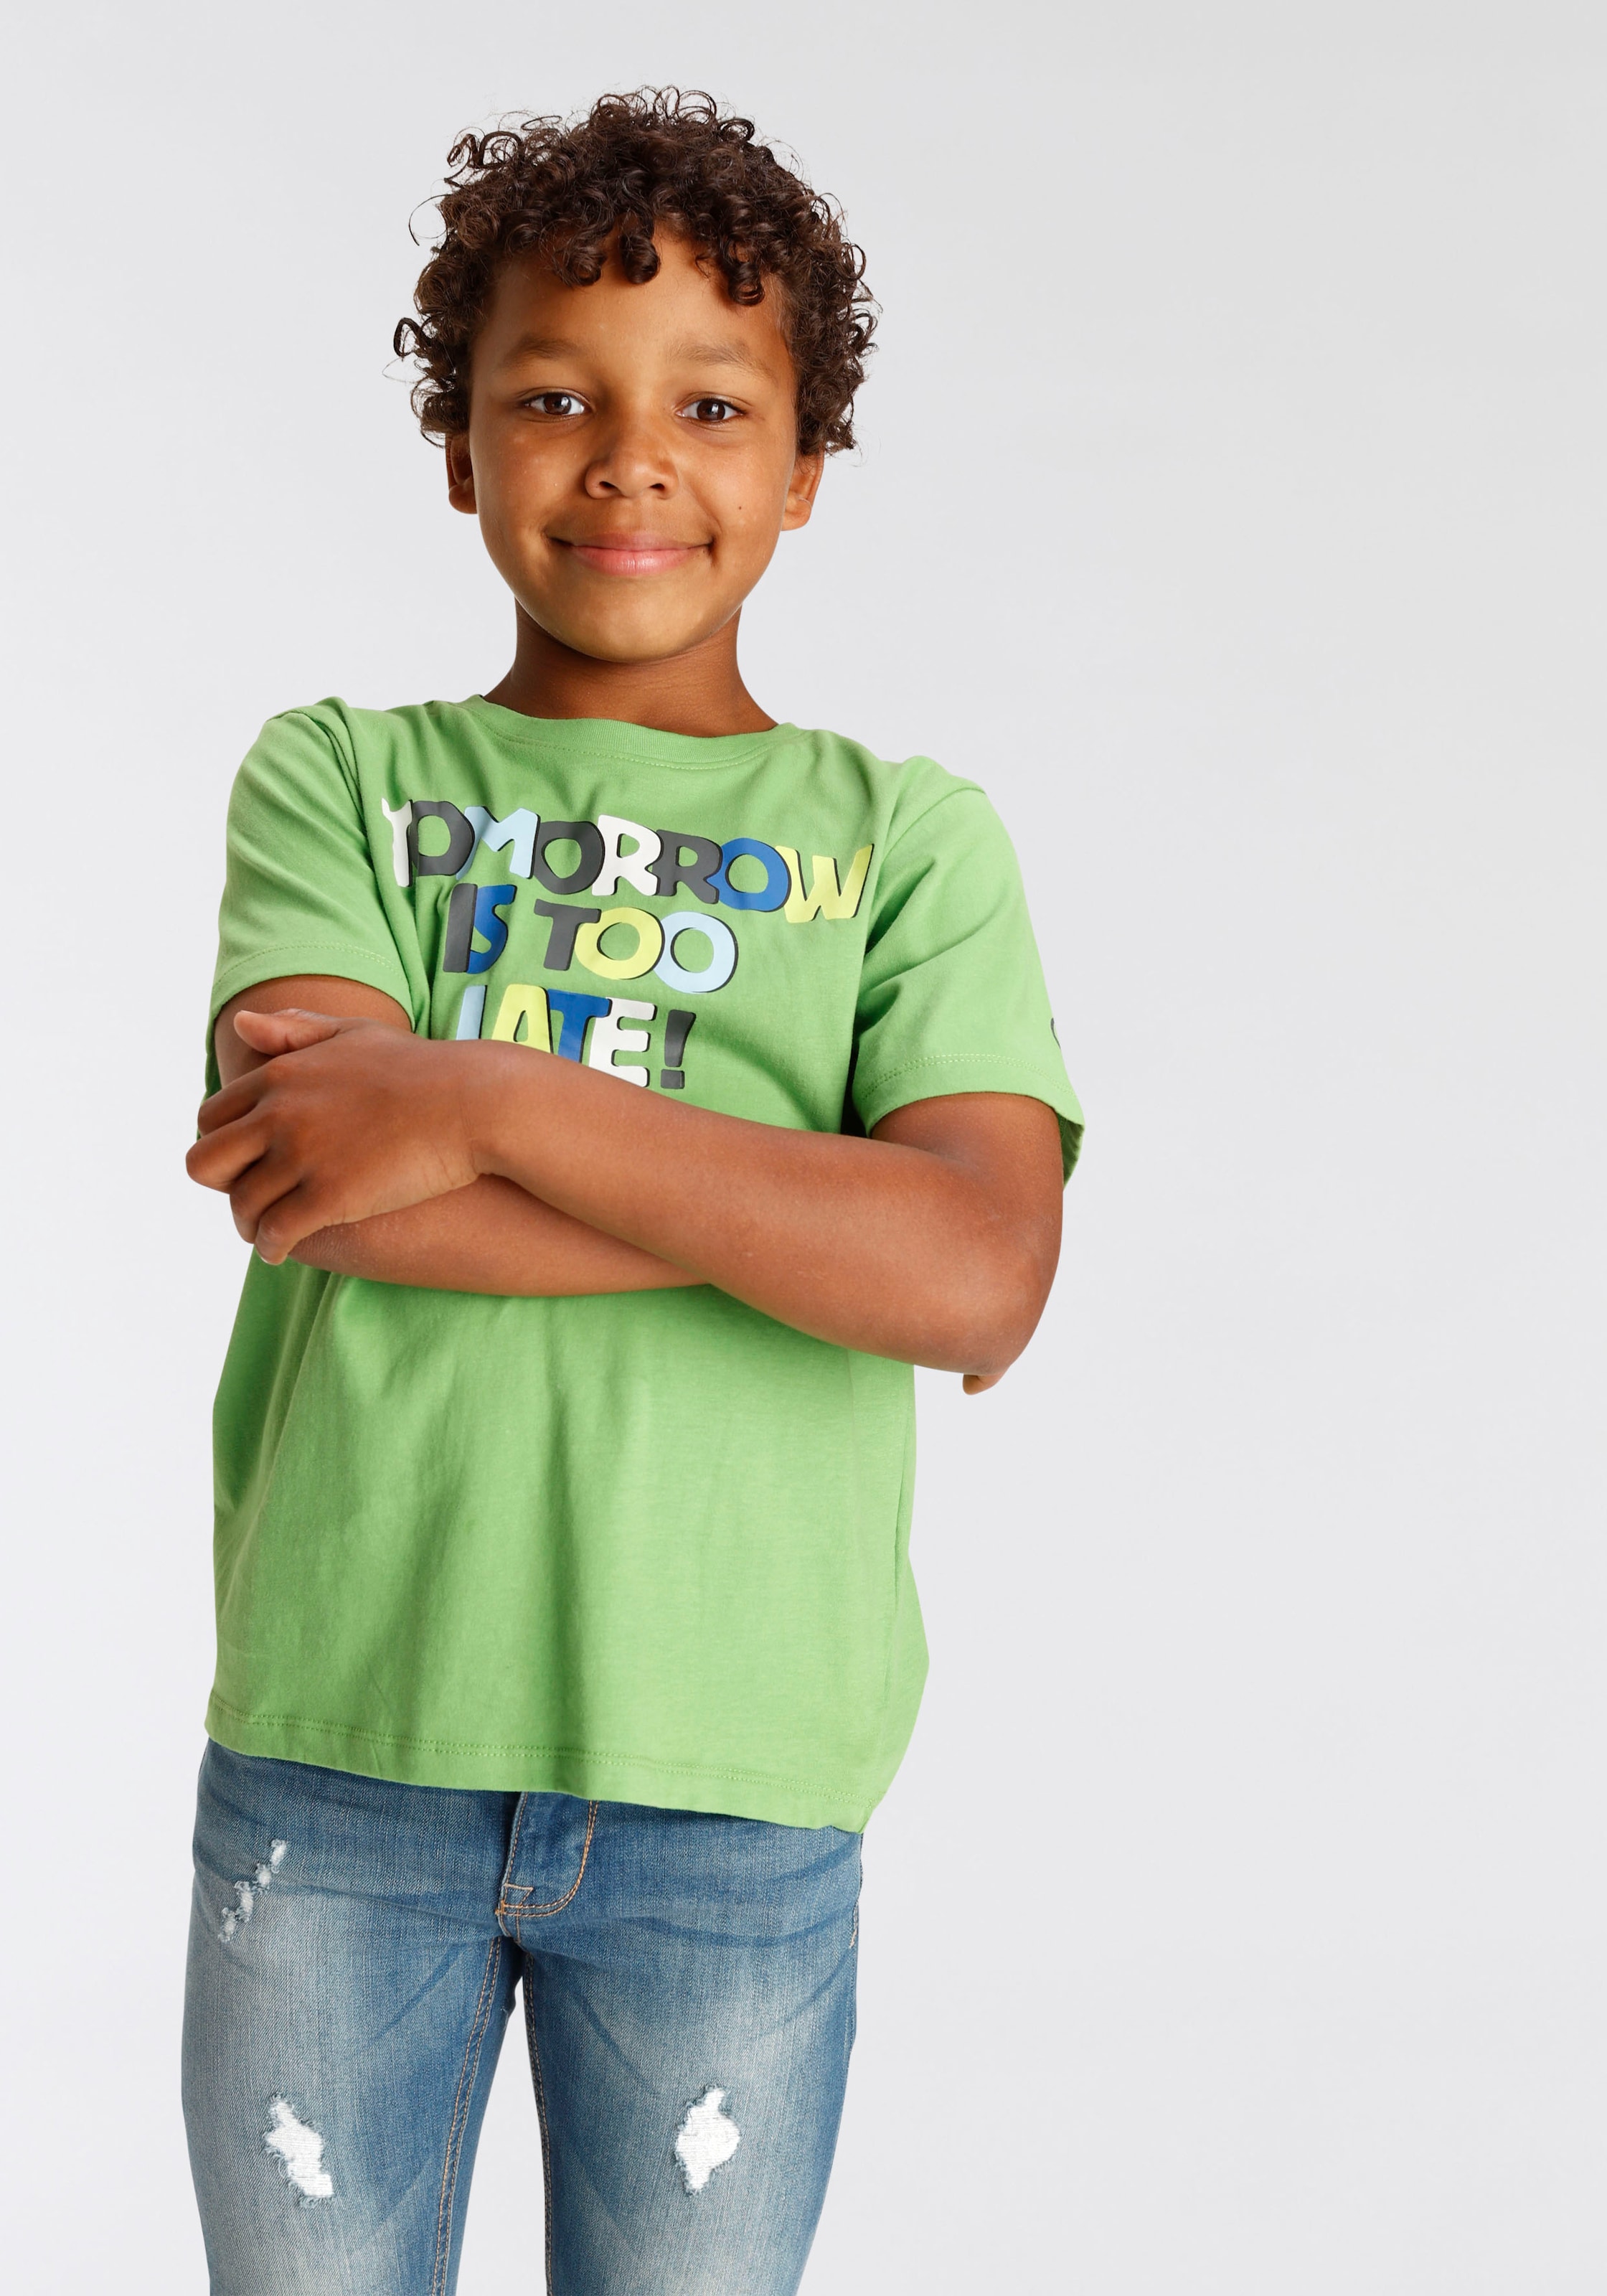 KIDSWORLD T-Shirt Spruch LATE«, »TOMORROW IS TOO bei OTTO